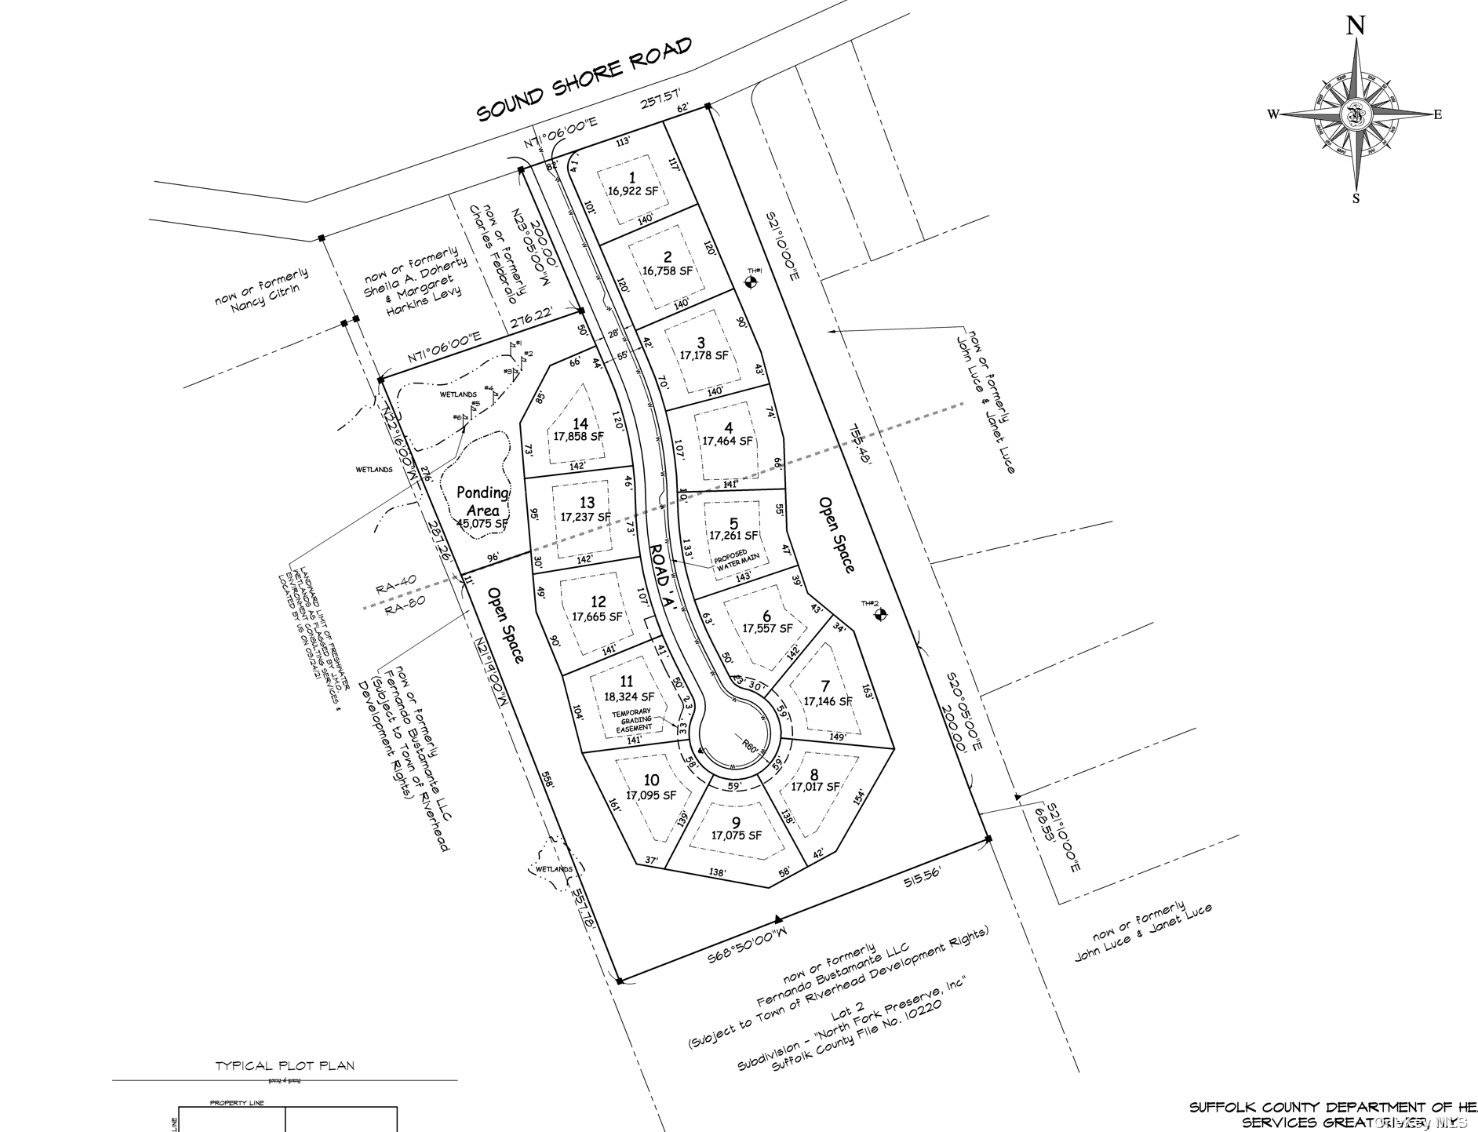 Application for a 14 Lot Subdivision is pending approval.